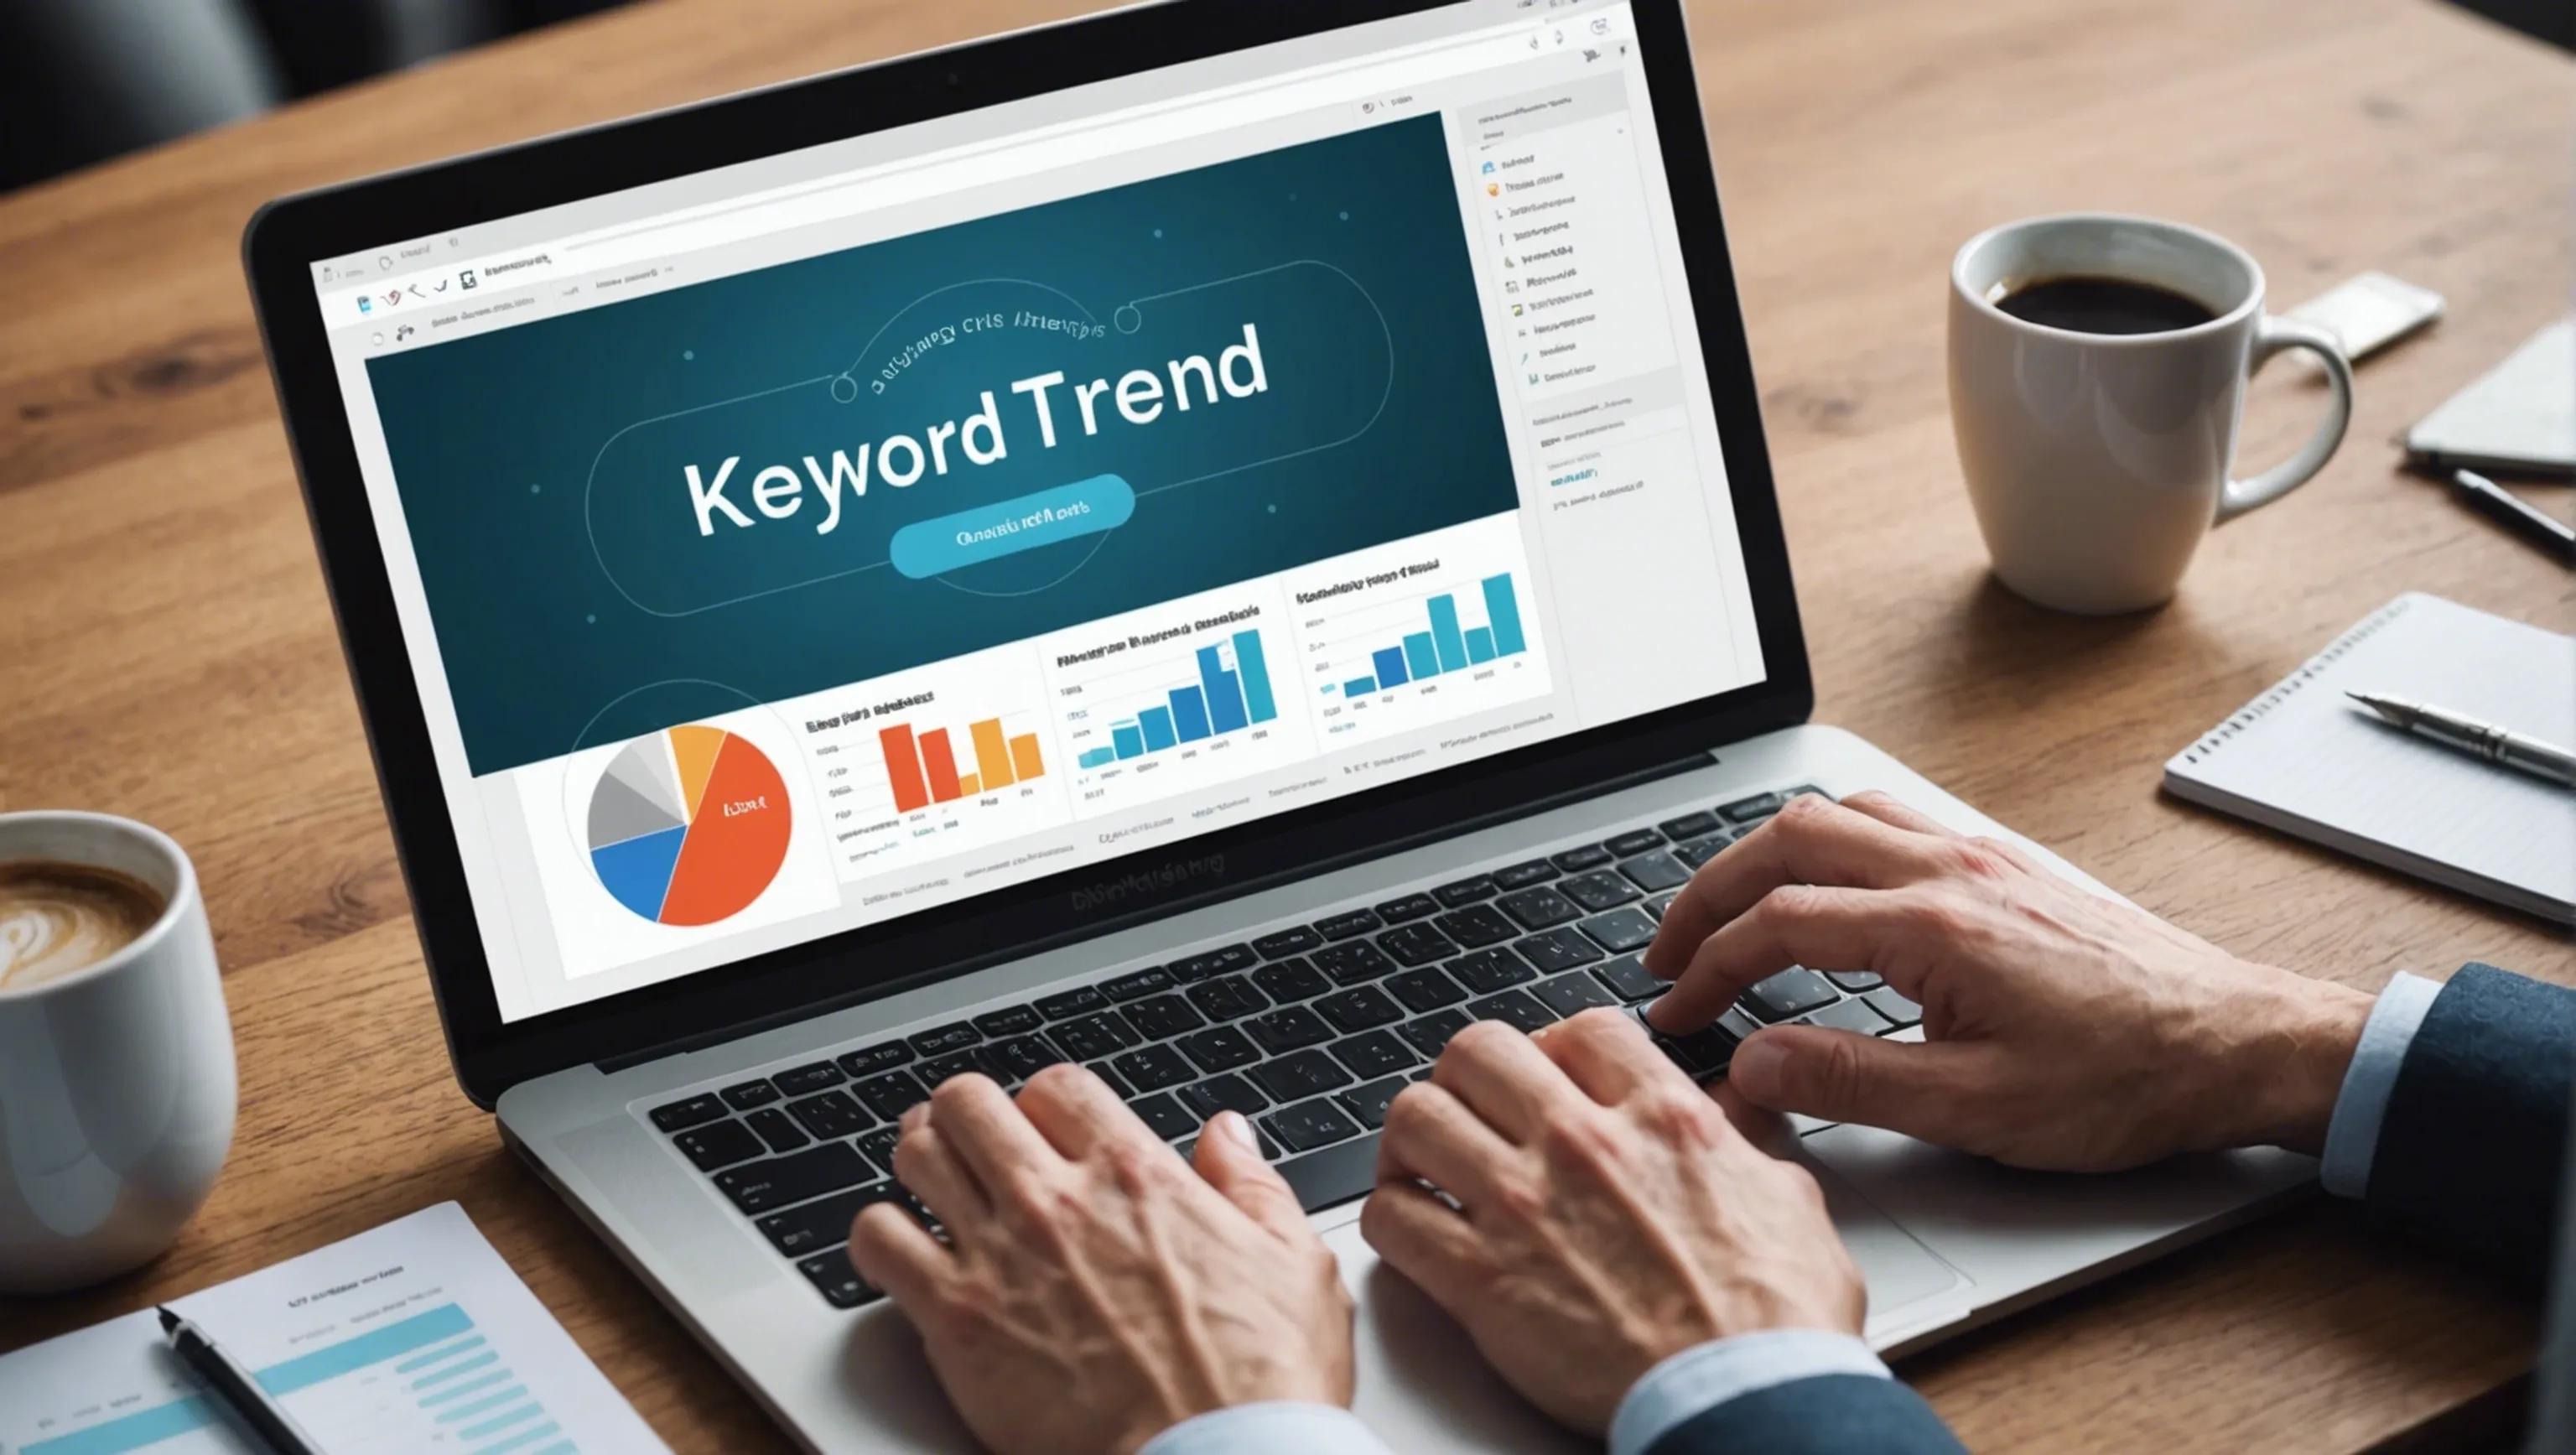 Keyword trend analysis for marketing professionals